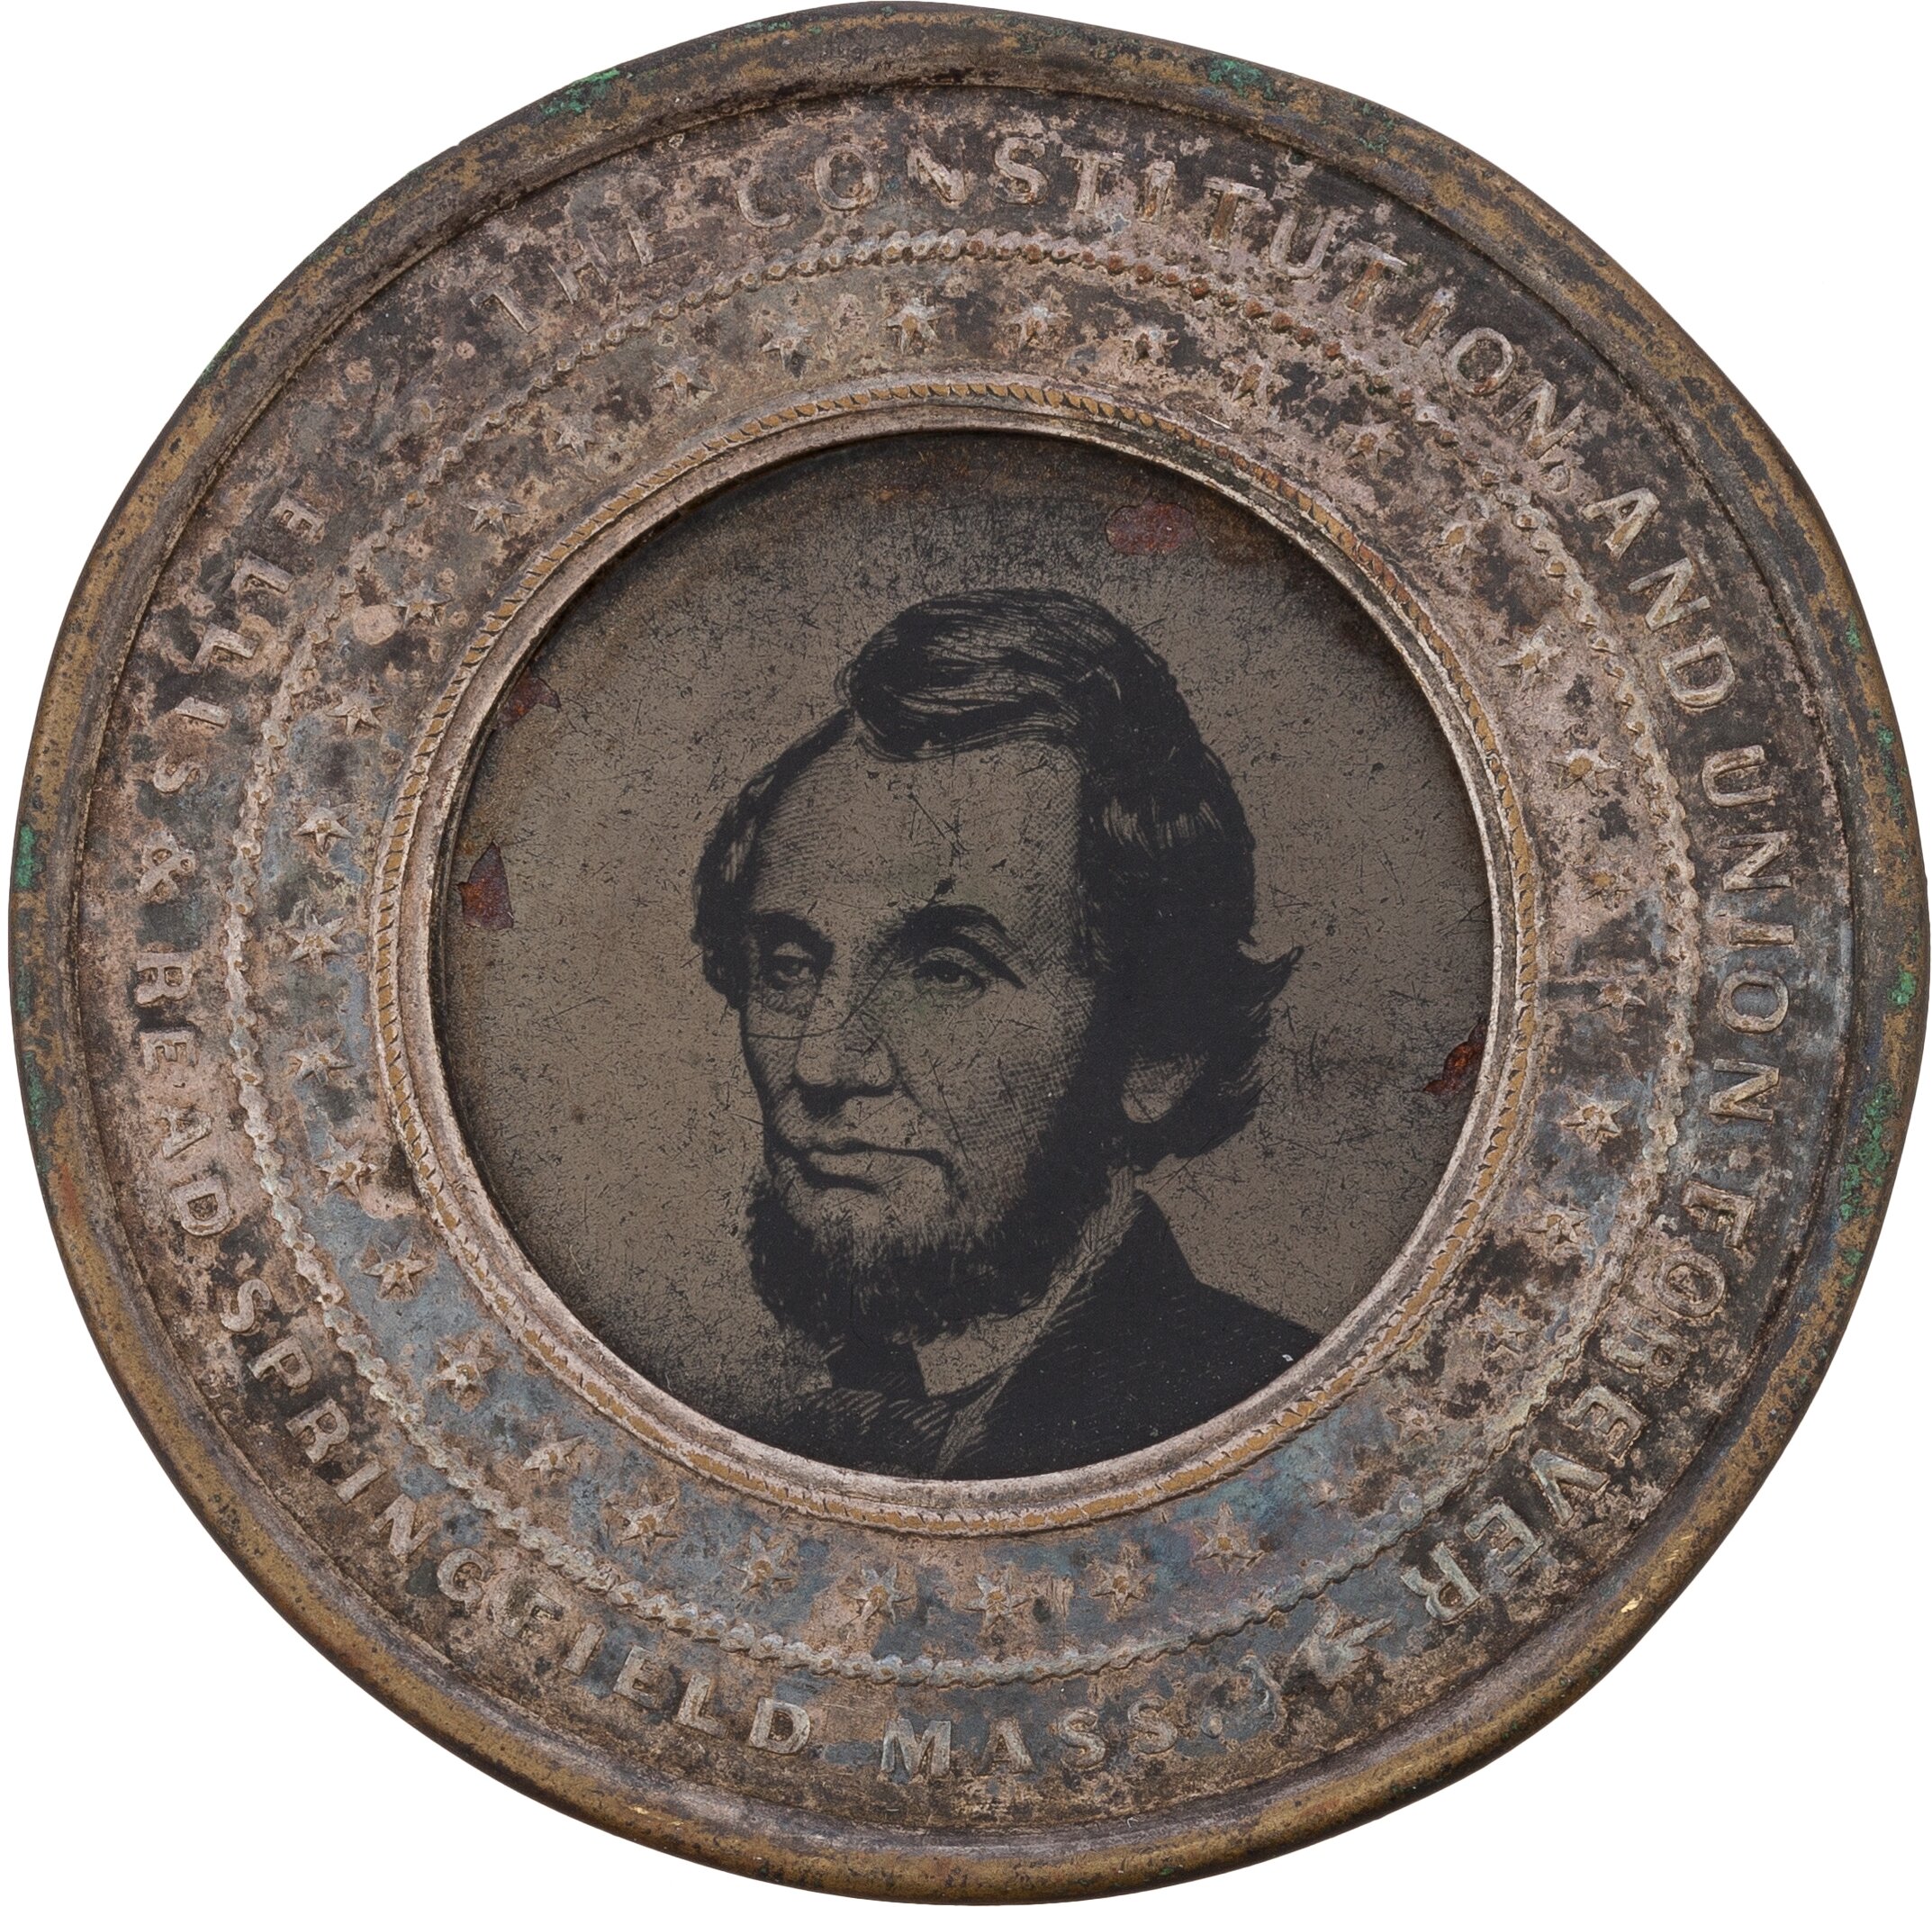 Abraham Lincoln A Most Unusual Variant of the Perpetual Calendar